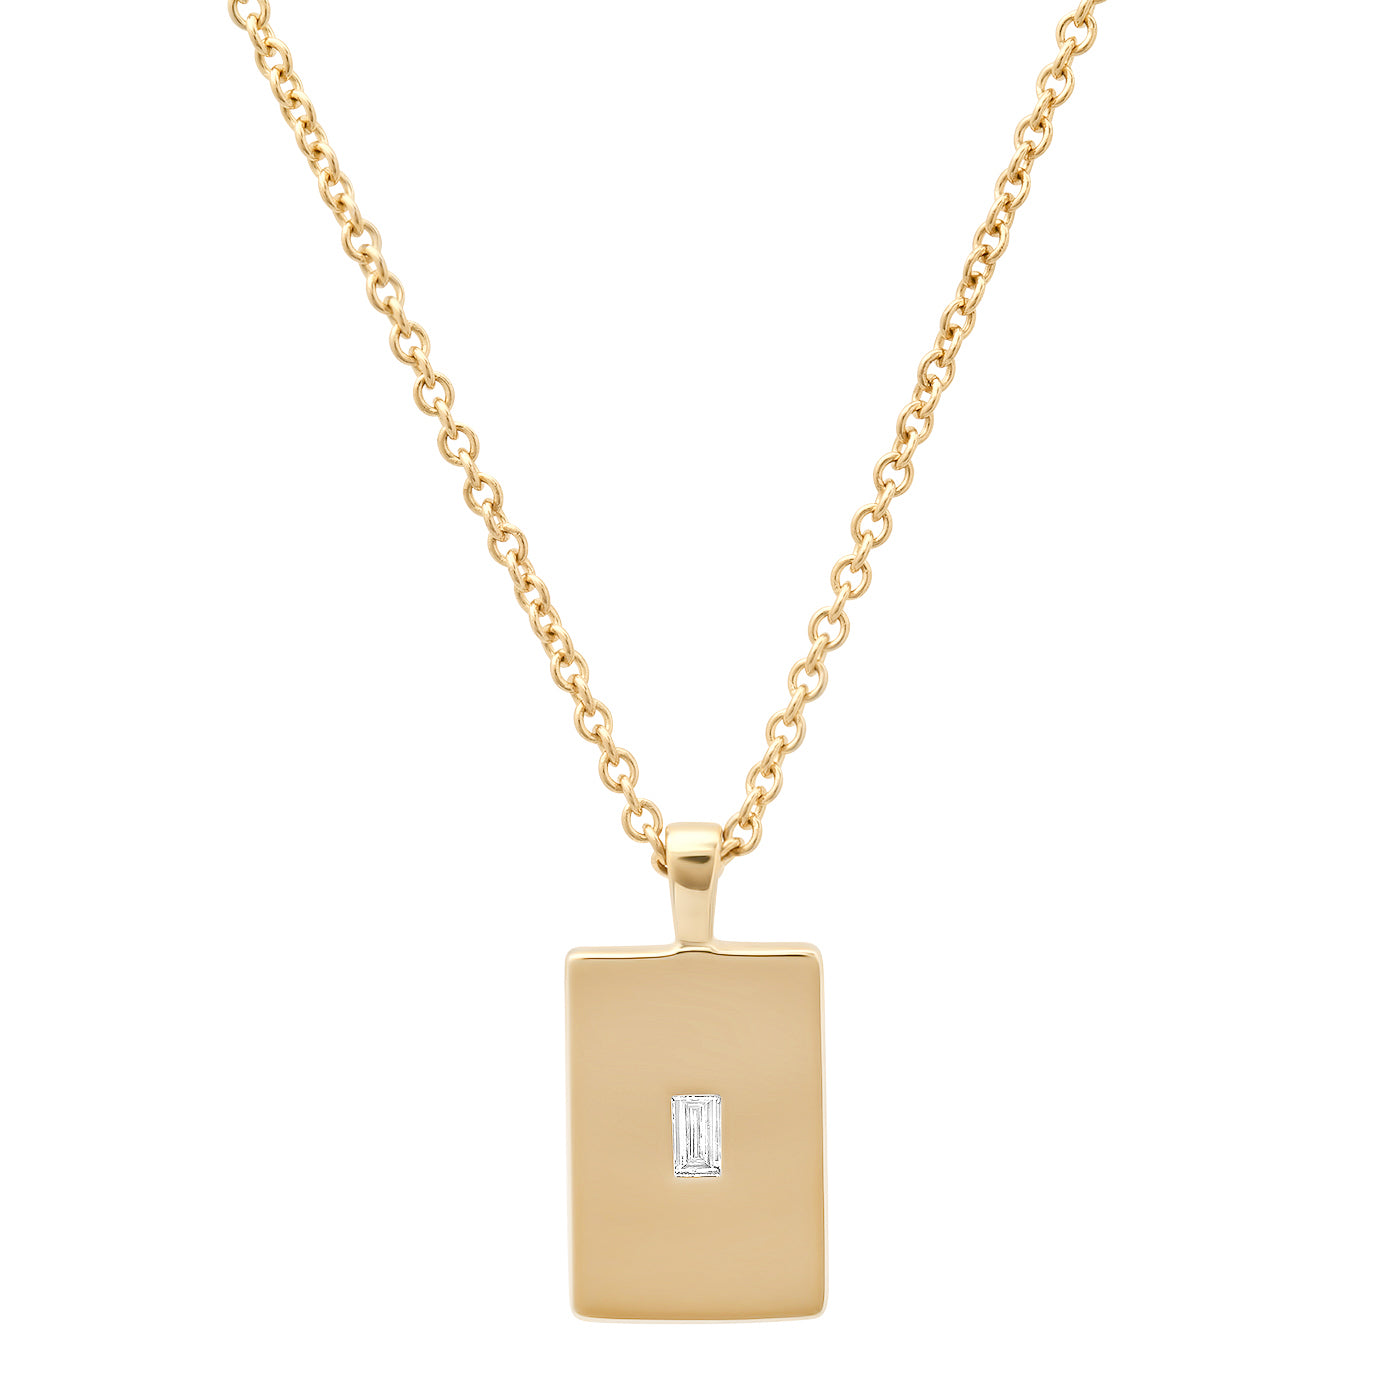 Buy Black and Gold Stainless Steel Matte Finish Cut-Out Frame and Hammered  Design Dog Tag Pendant with Chain Online - Inox Jewelry India